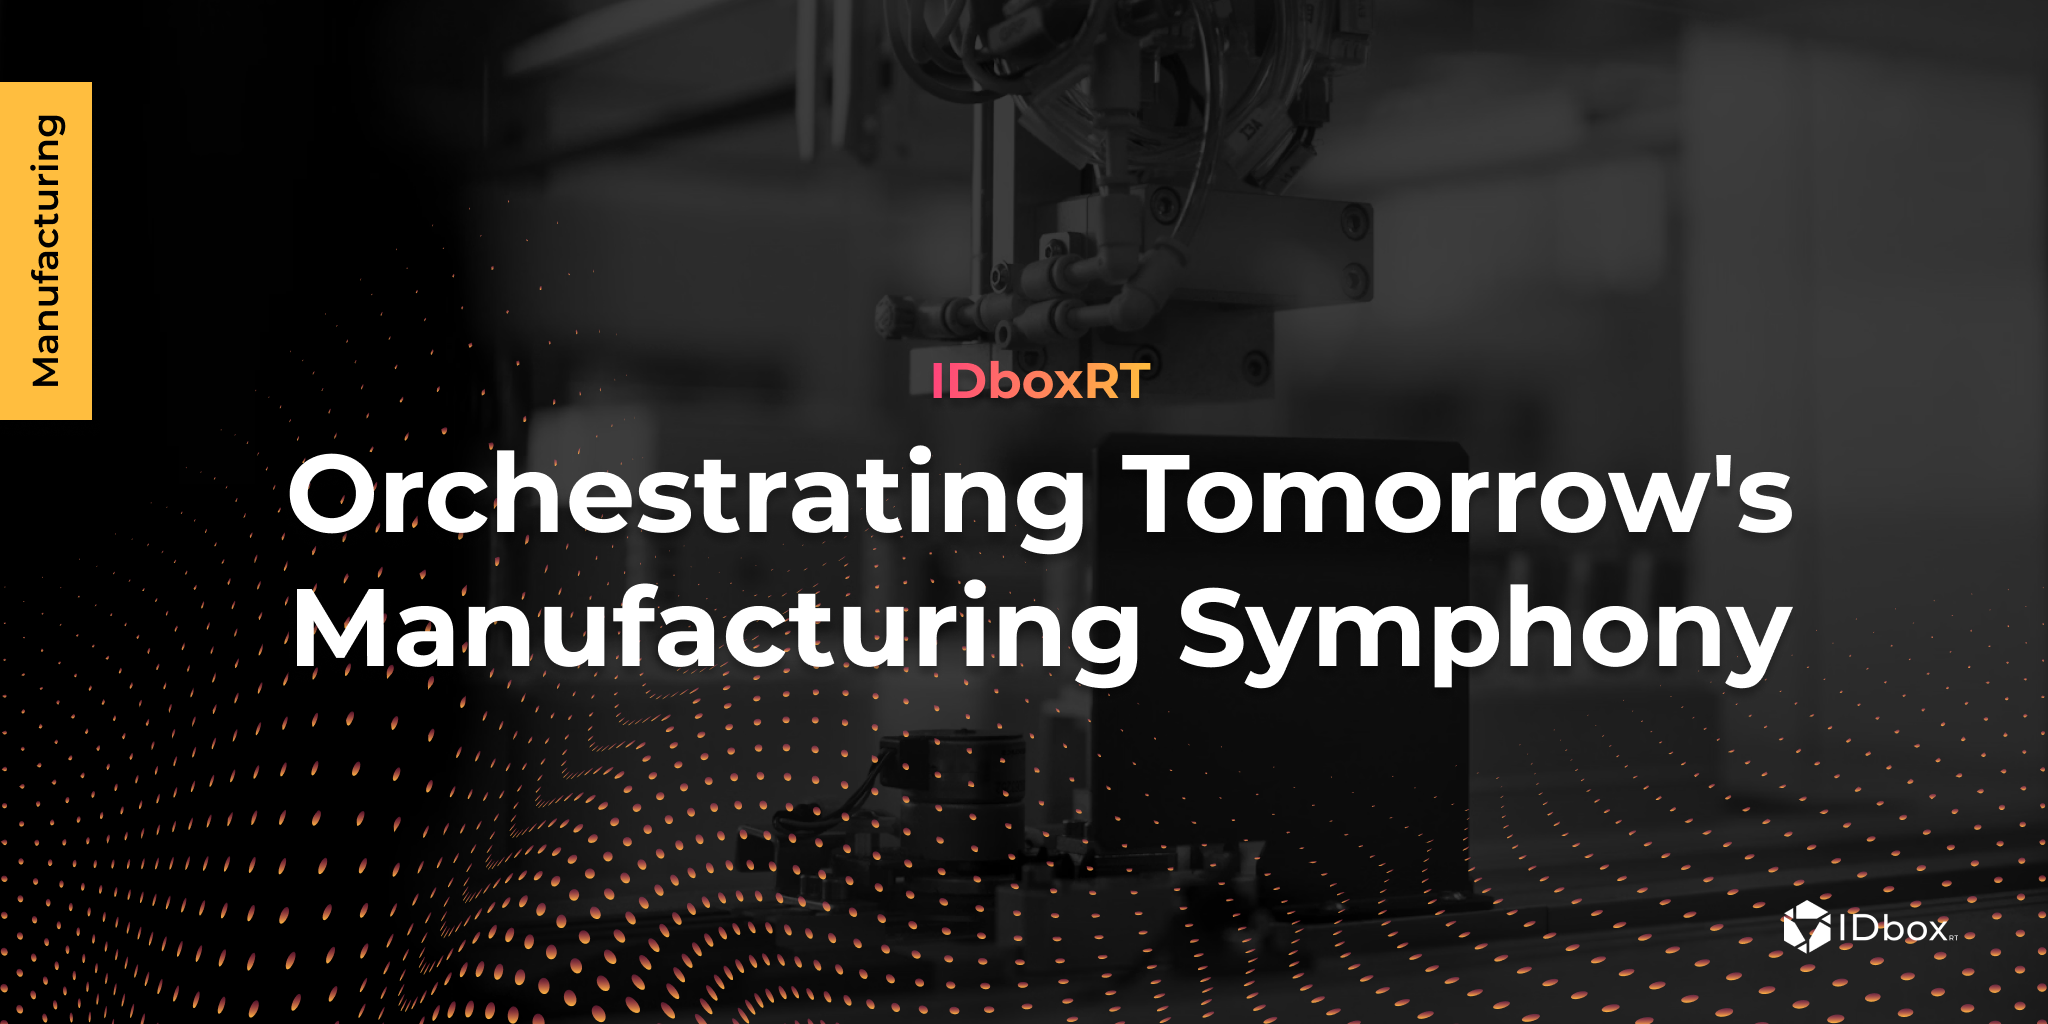 IDboxRT: Orchestrating Tomorrow’s Manufacturing Symphony